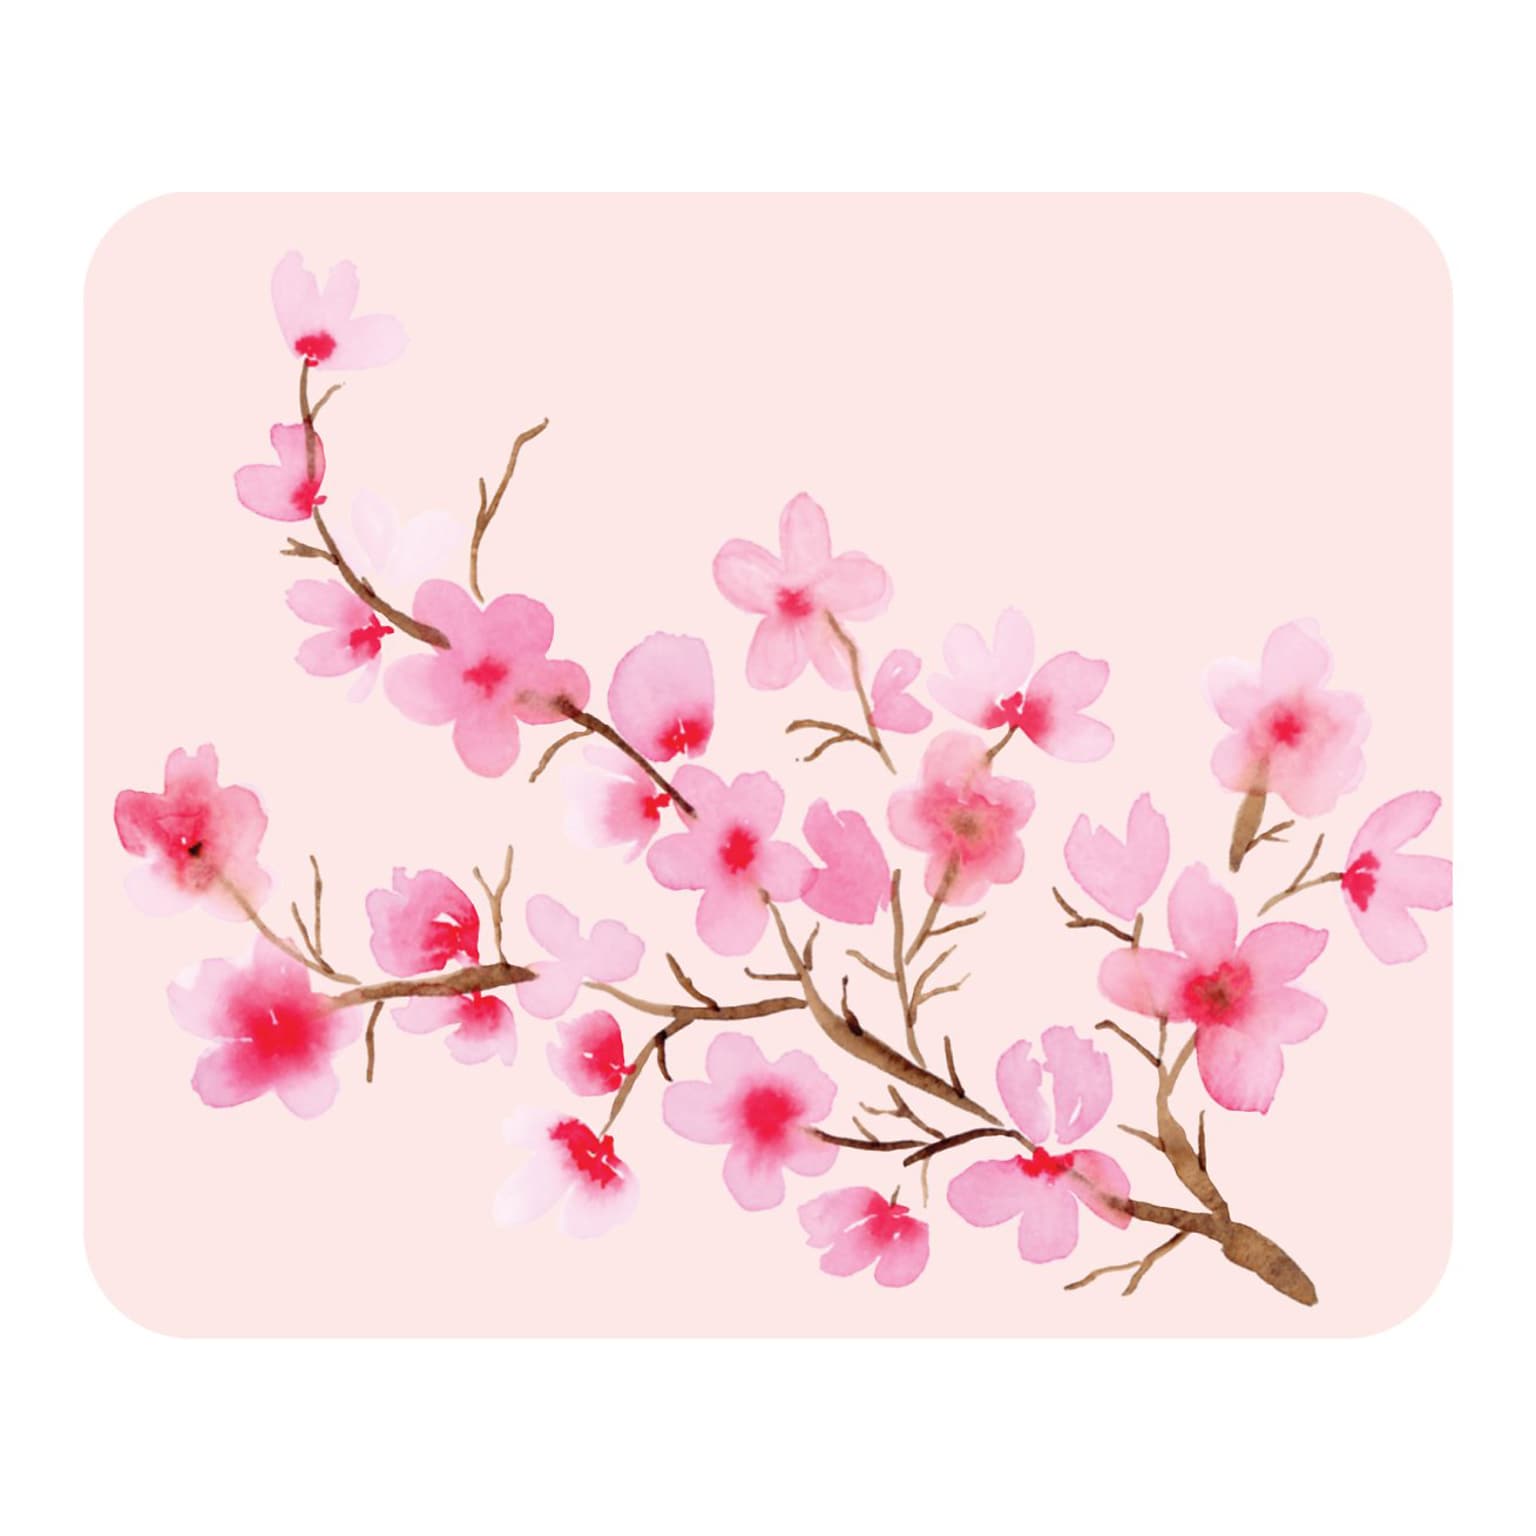 OTM Essentials Prints Series Cherry Blossoms Mouse Pad, Pink/Brown (OP-MH-A03-12B)